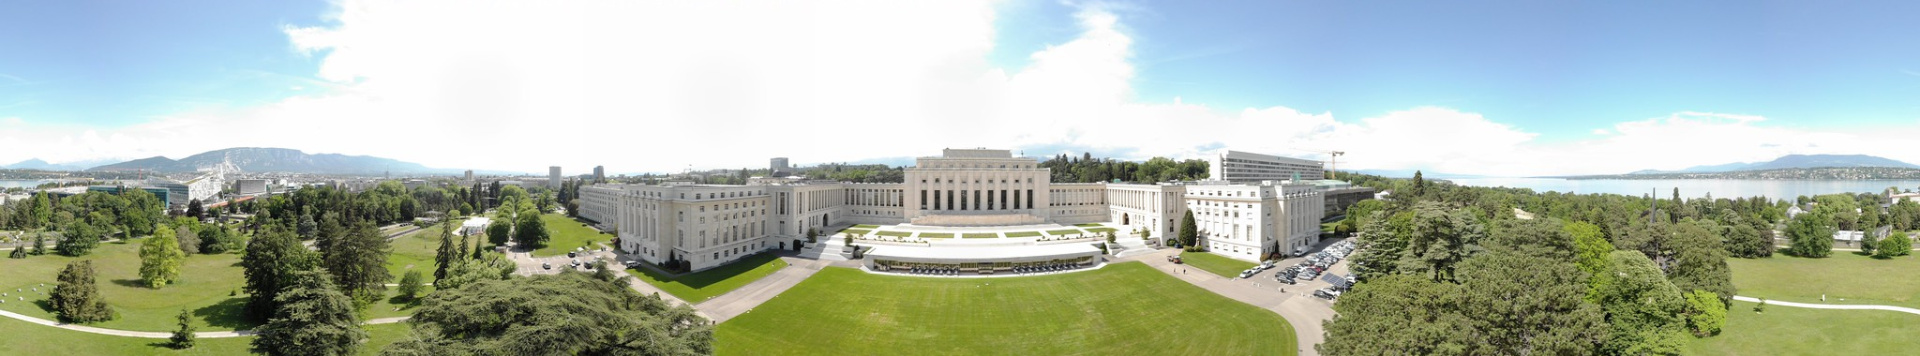 A view from above of the main building and the lush lawns of the Palais des Nations.